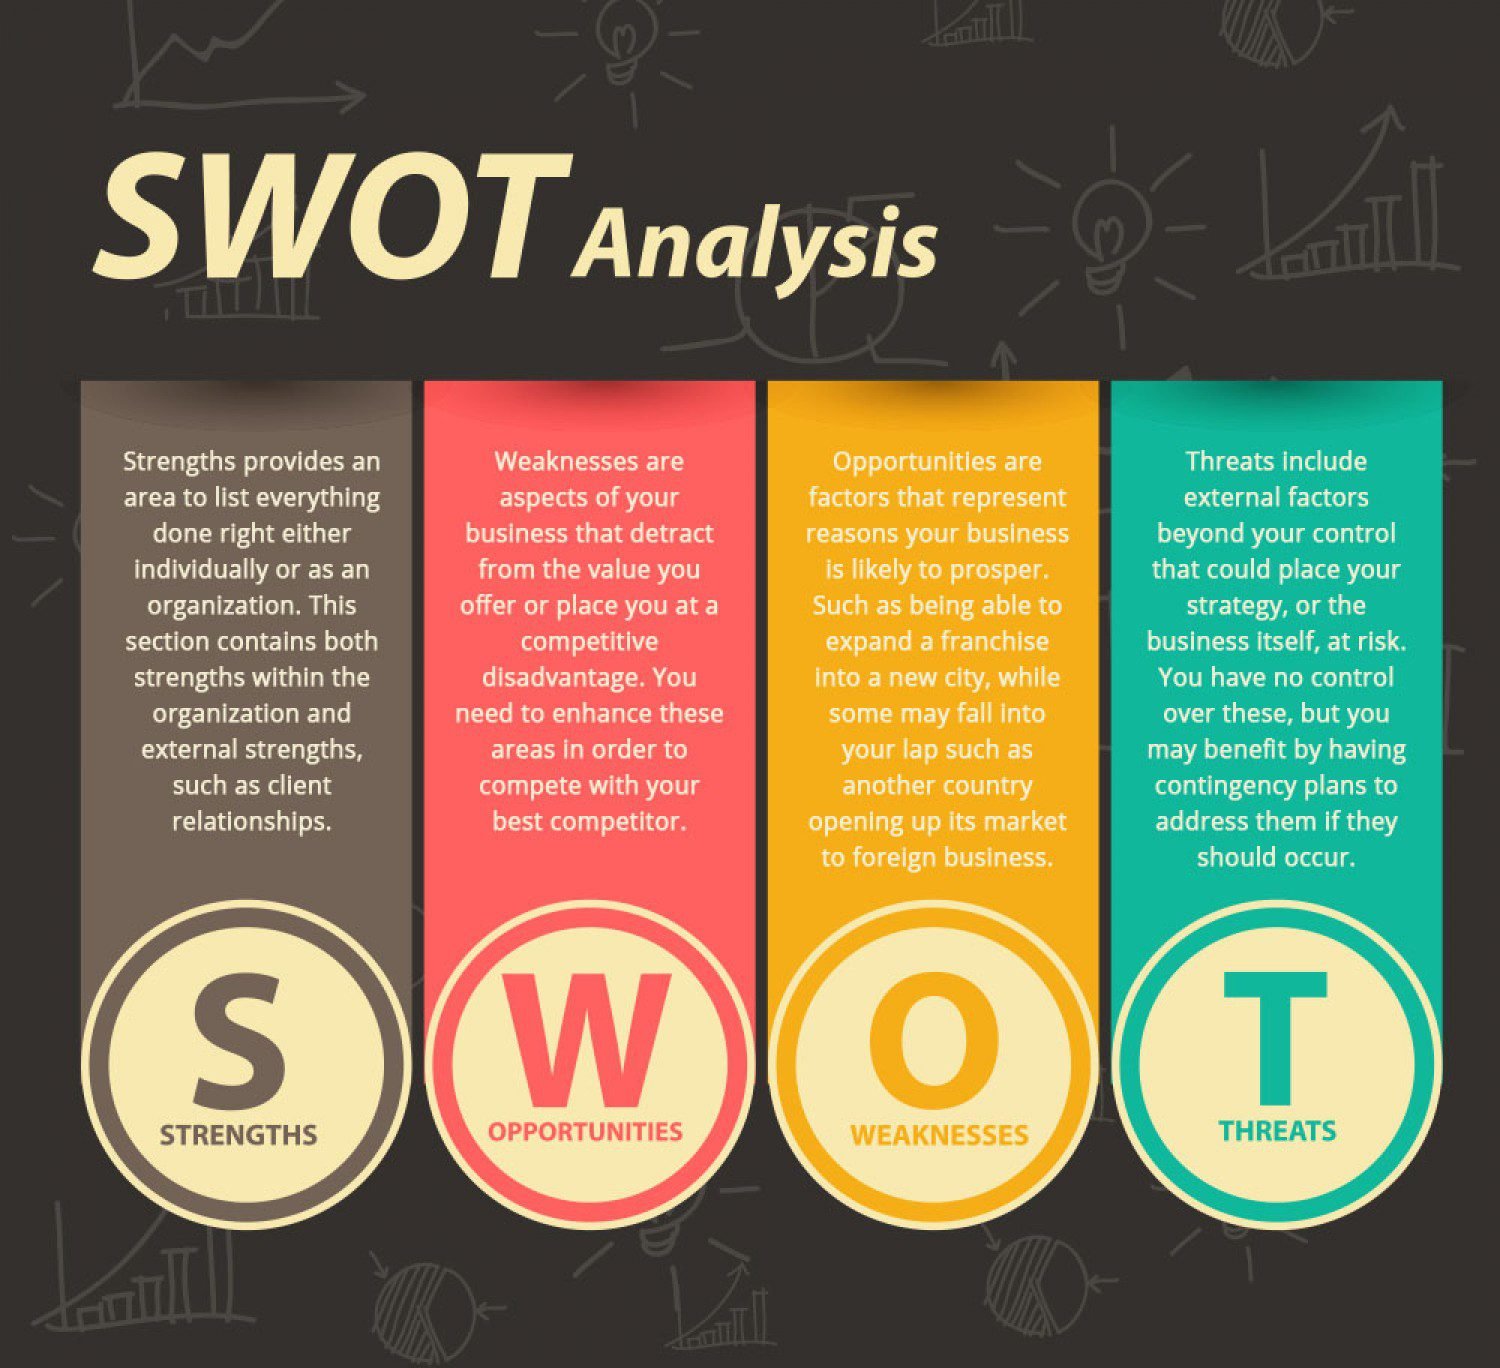 swot analysis is an important element of